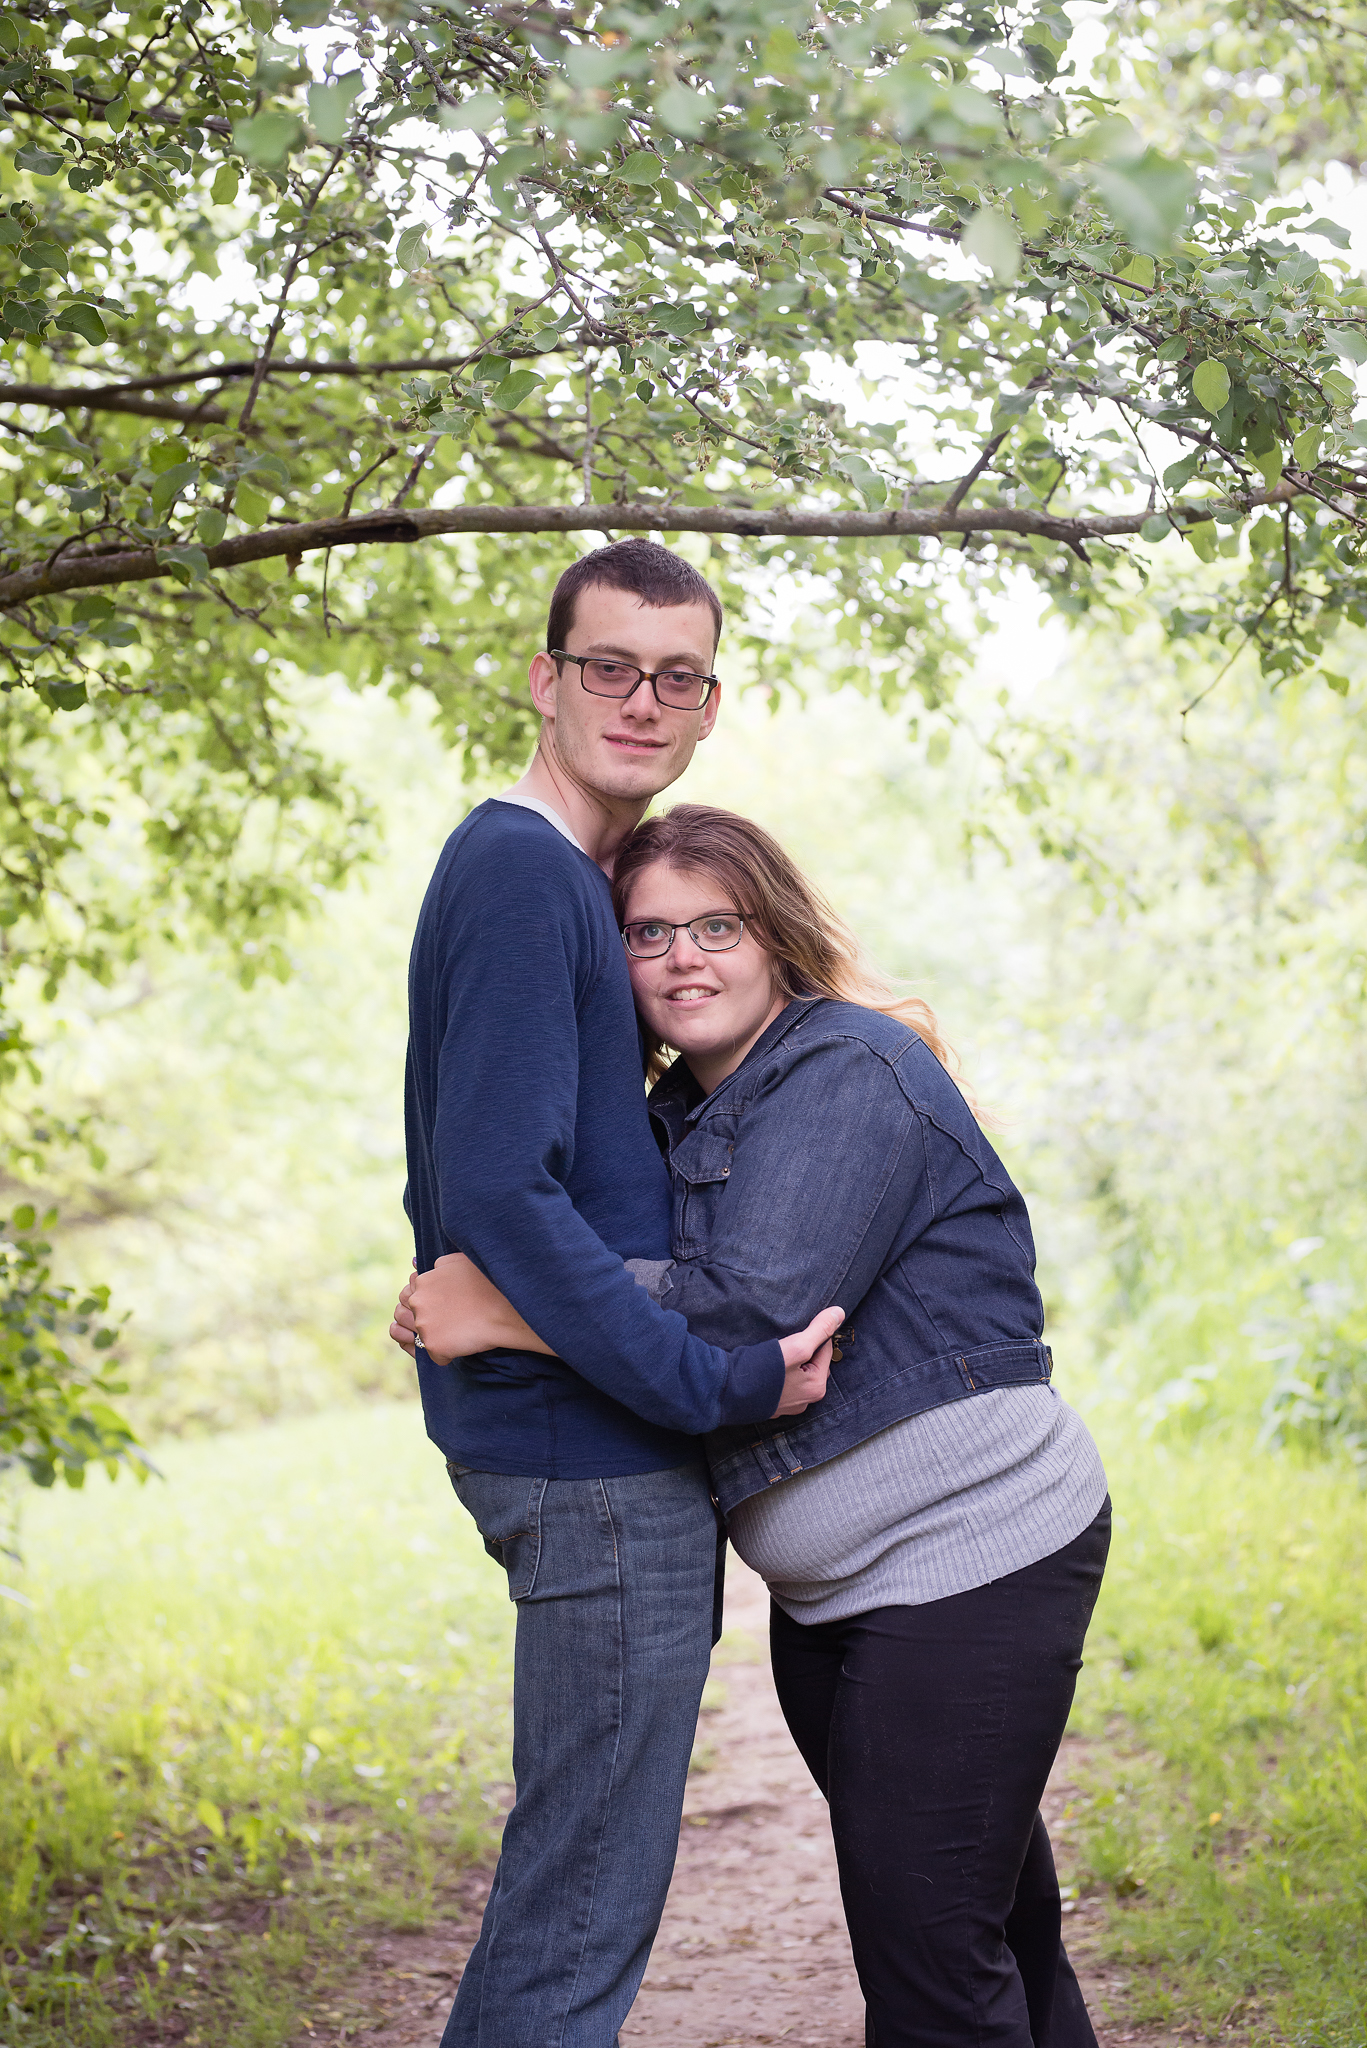 Couples227NaomiLuciennePhotography062018-2-Edit.jpg